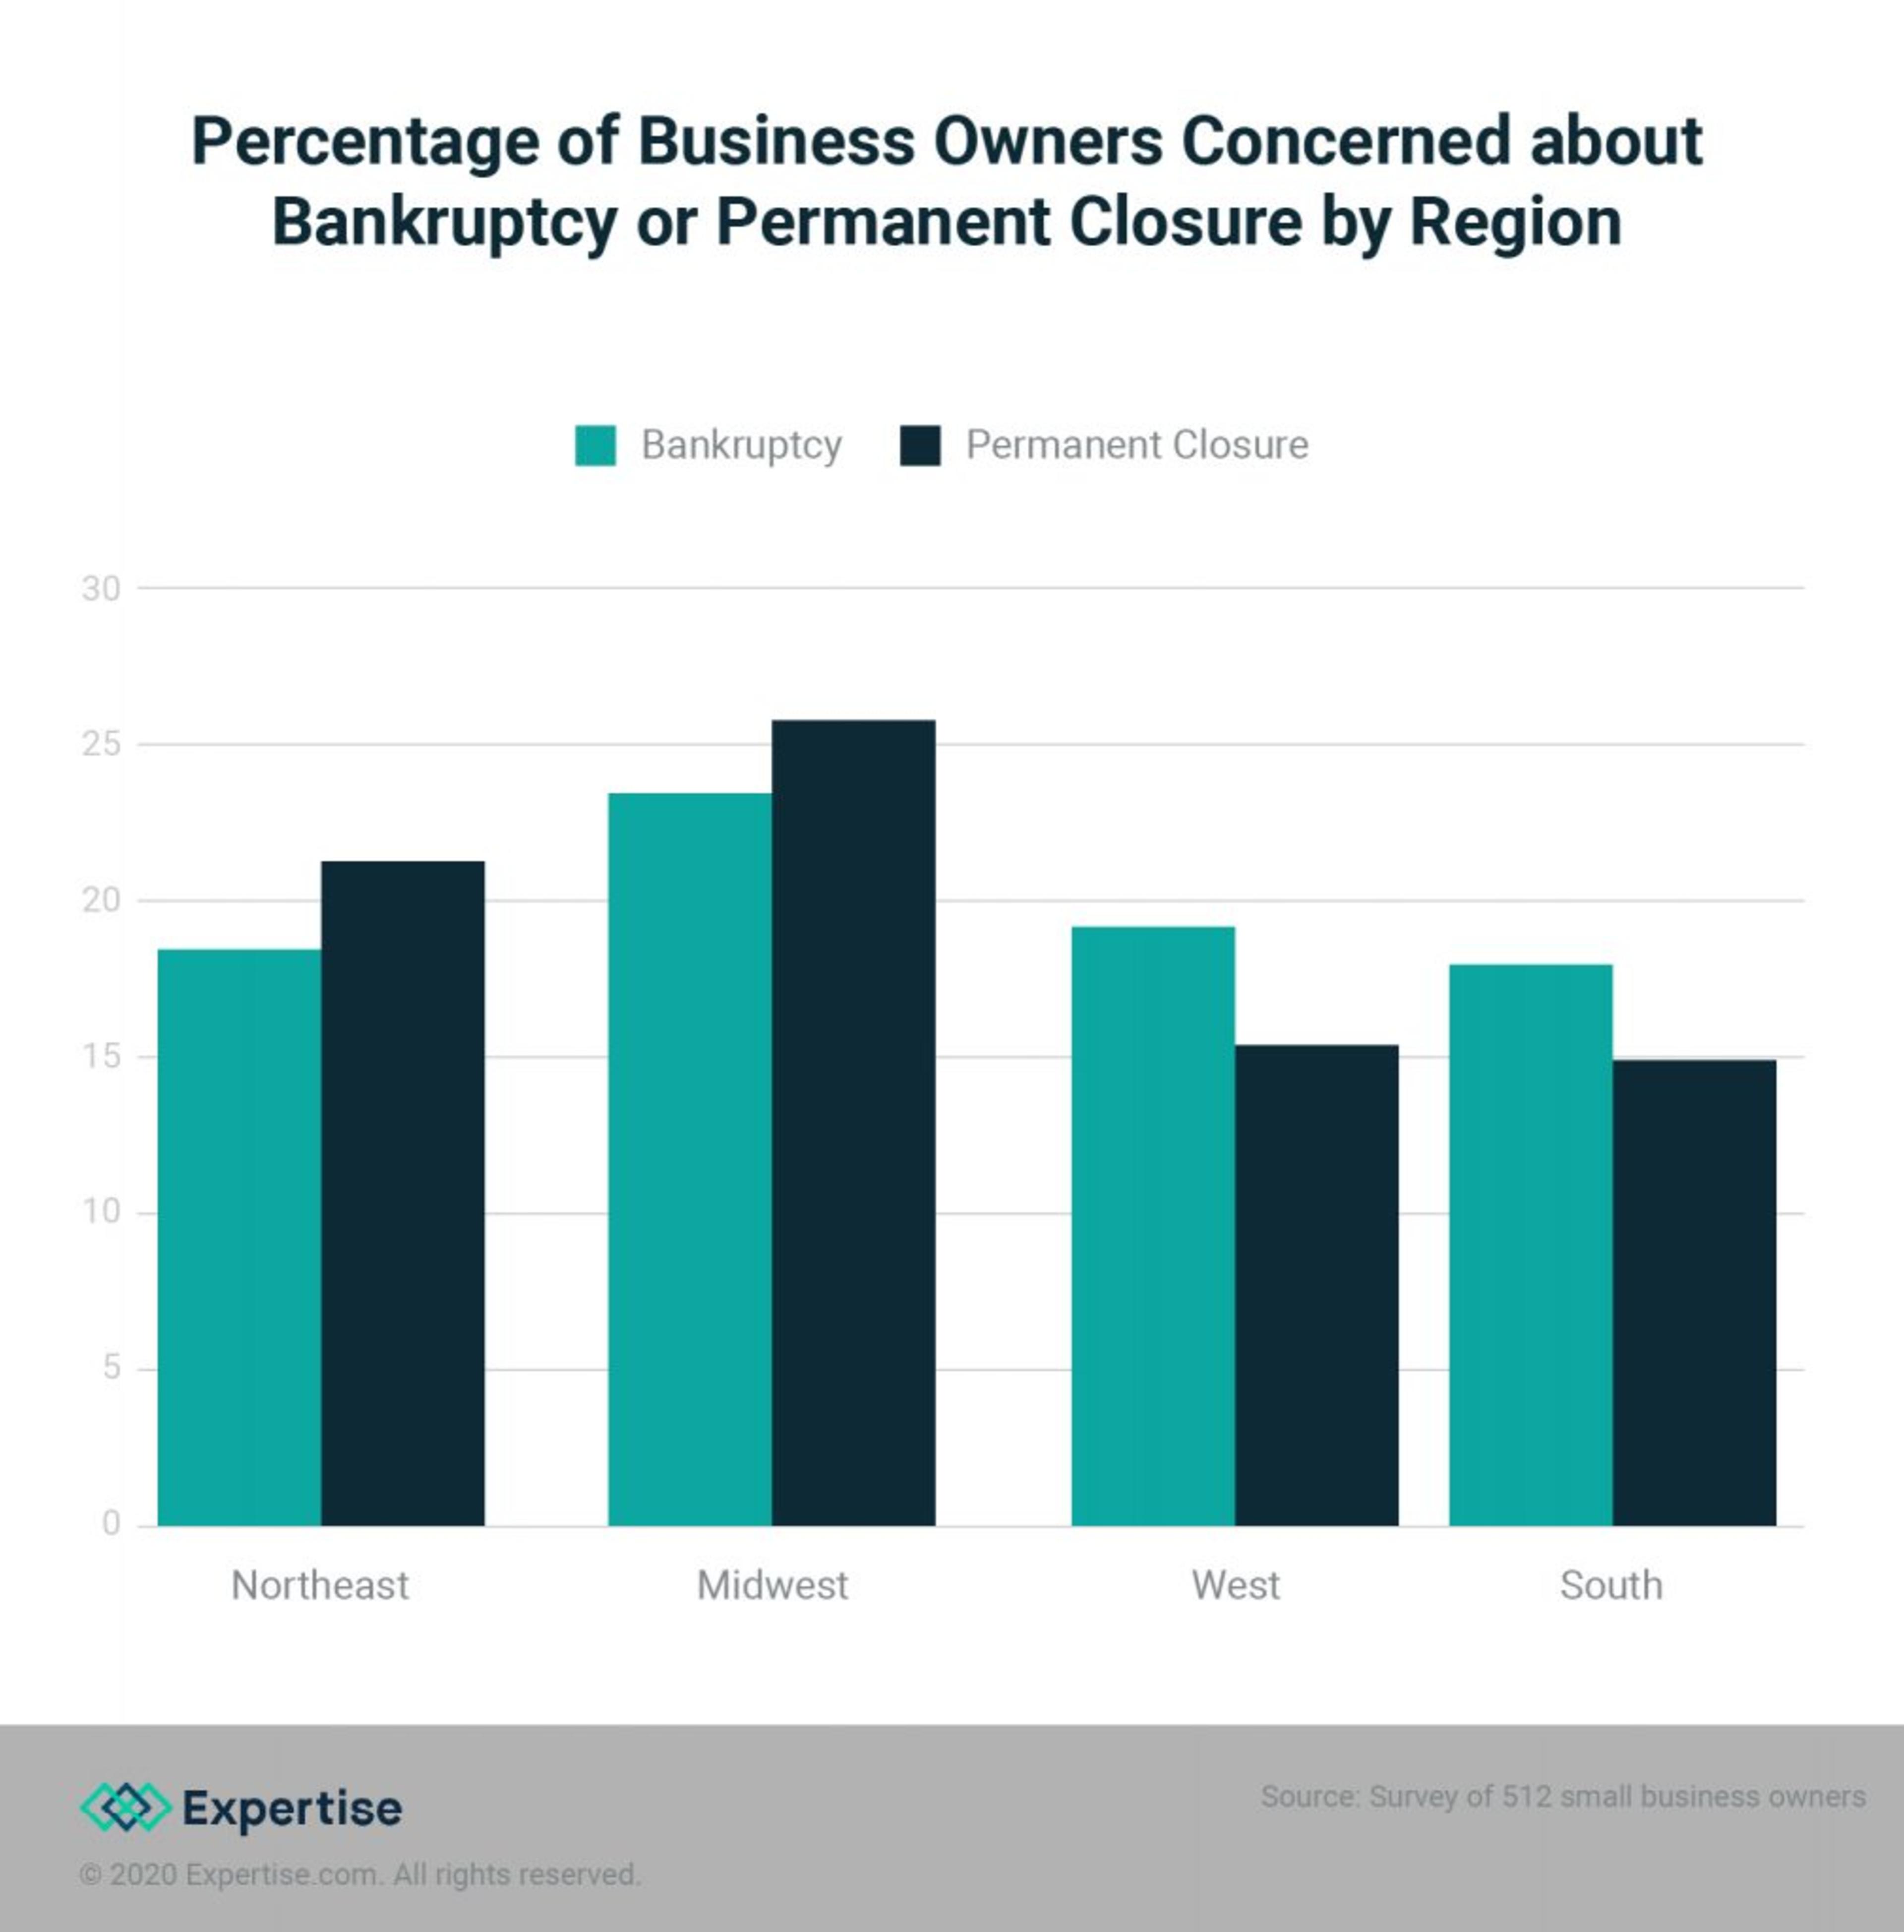 2 Out of 3 Business Owners Worry About Permanently Closing Due to Coronavirus